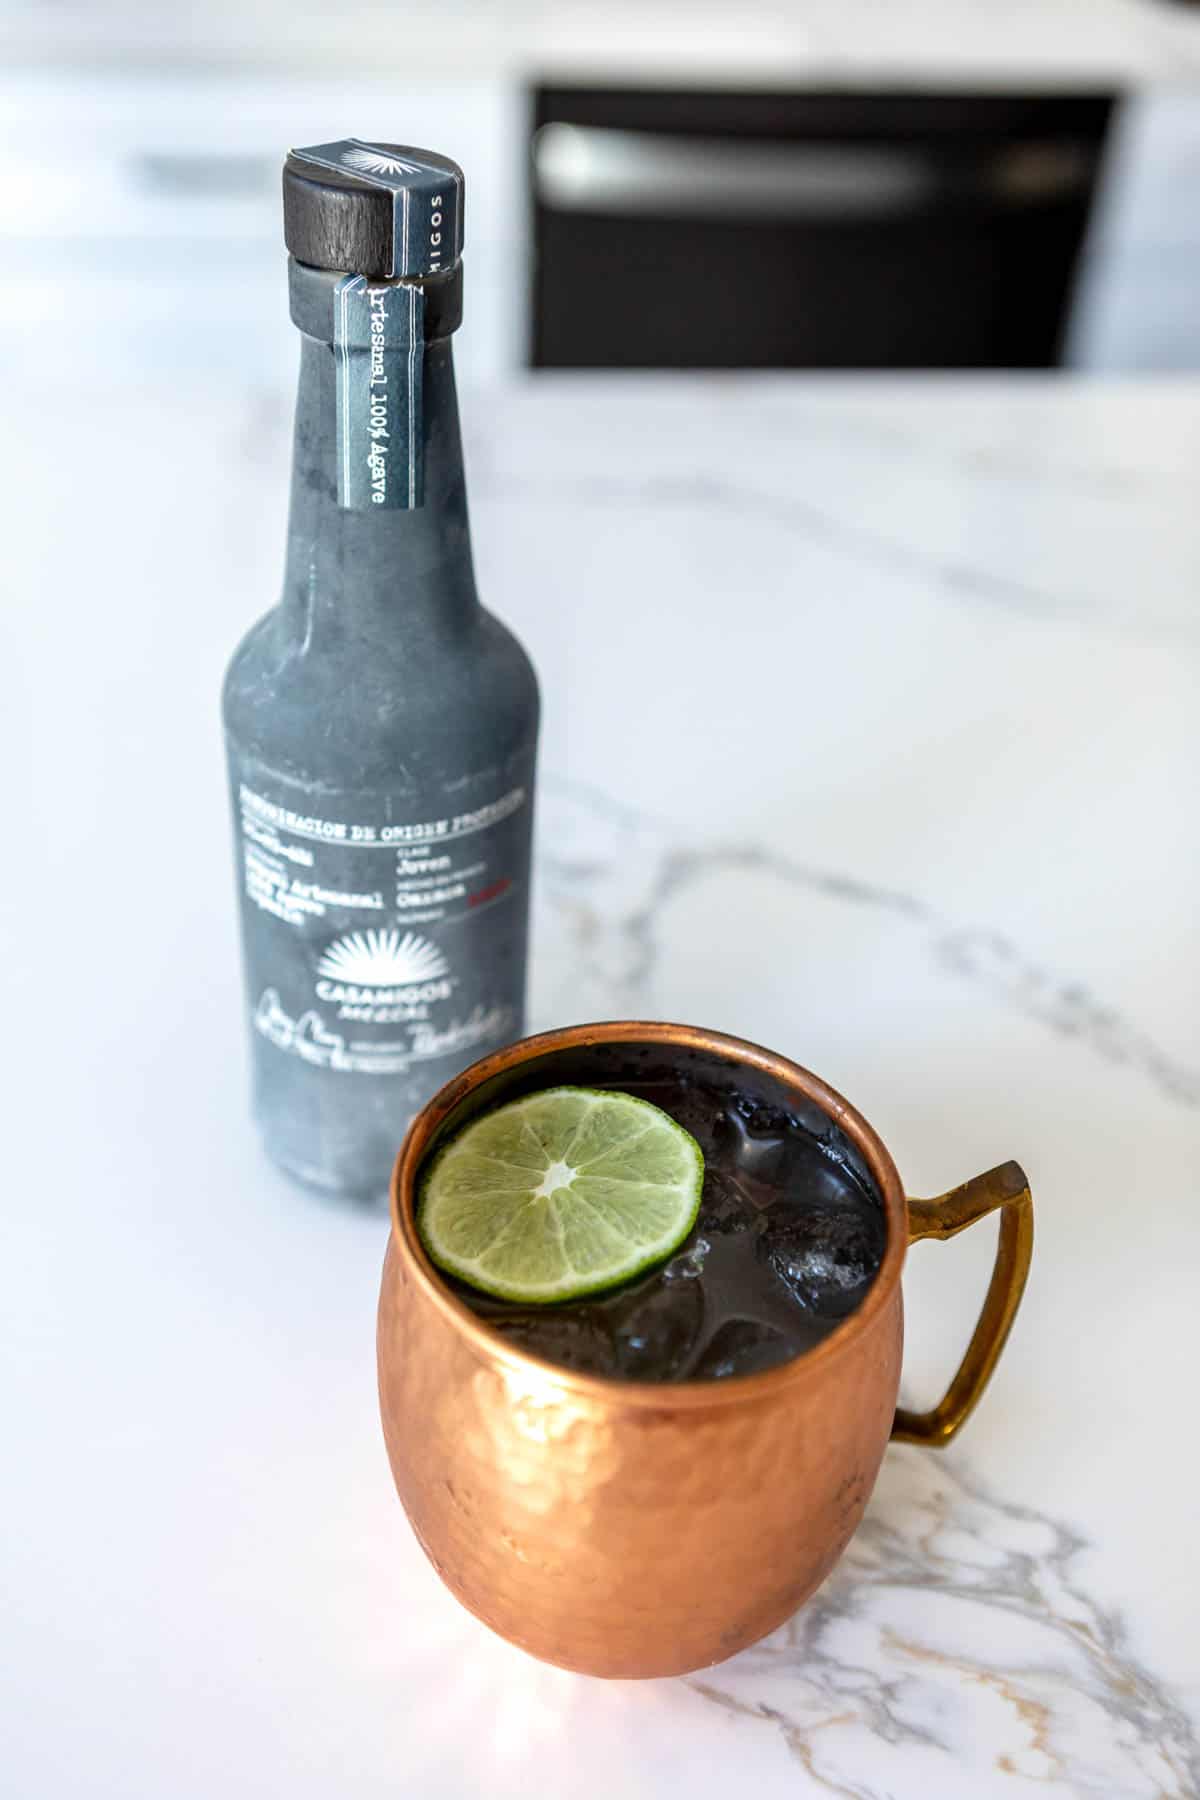 Mule in a copper mug on a white marble countertop next to a bottle of mezcal.